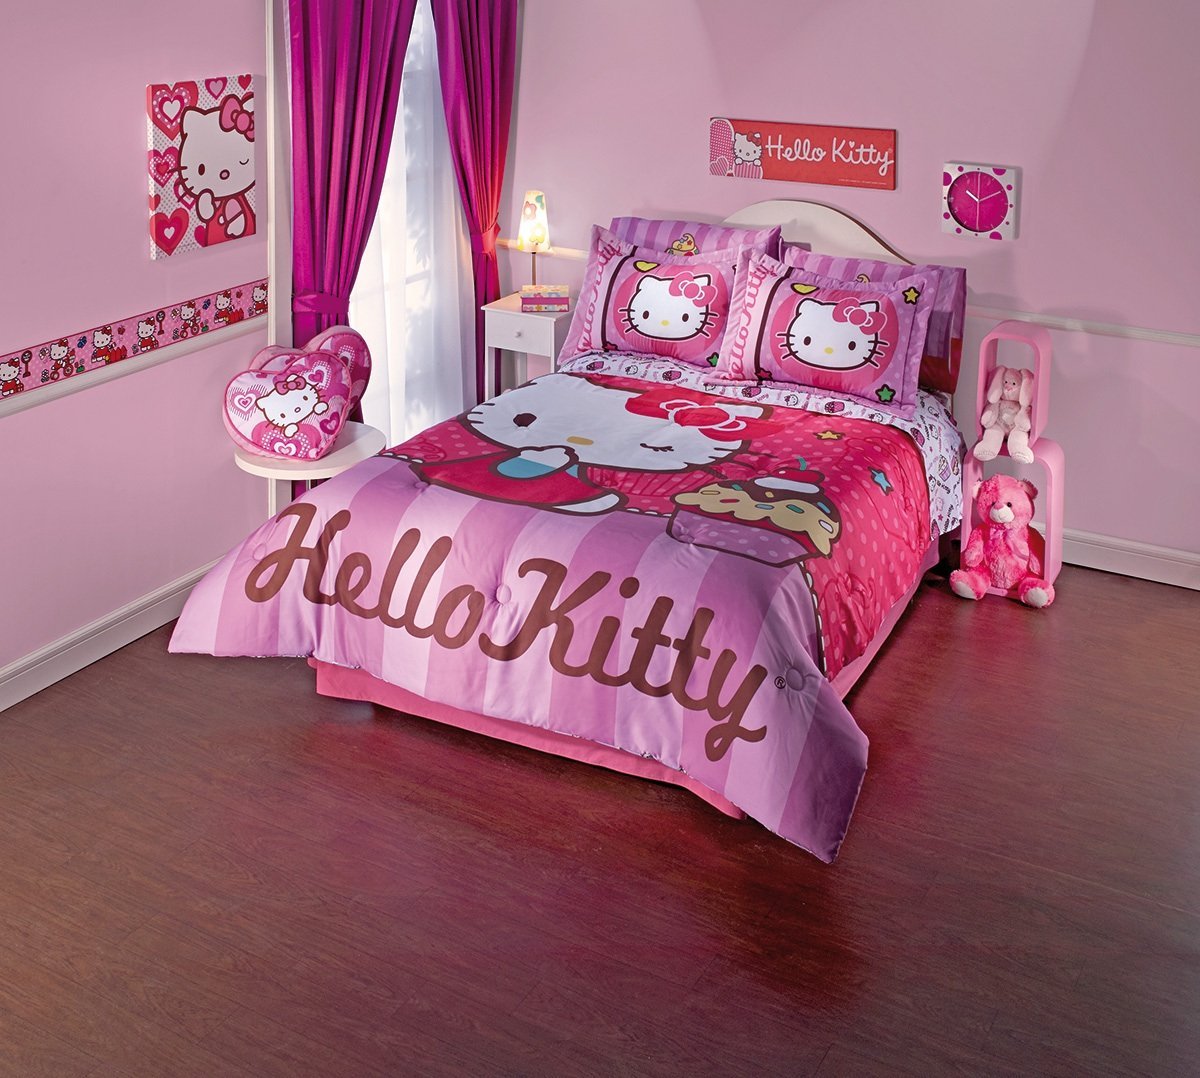 Lovely Hello Kitty Bedding Sets | Home Designing